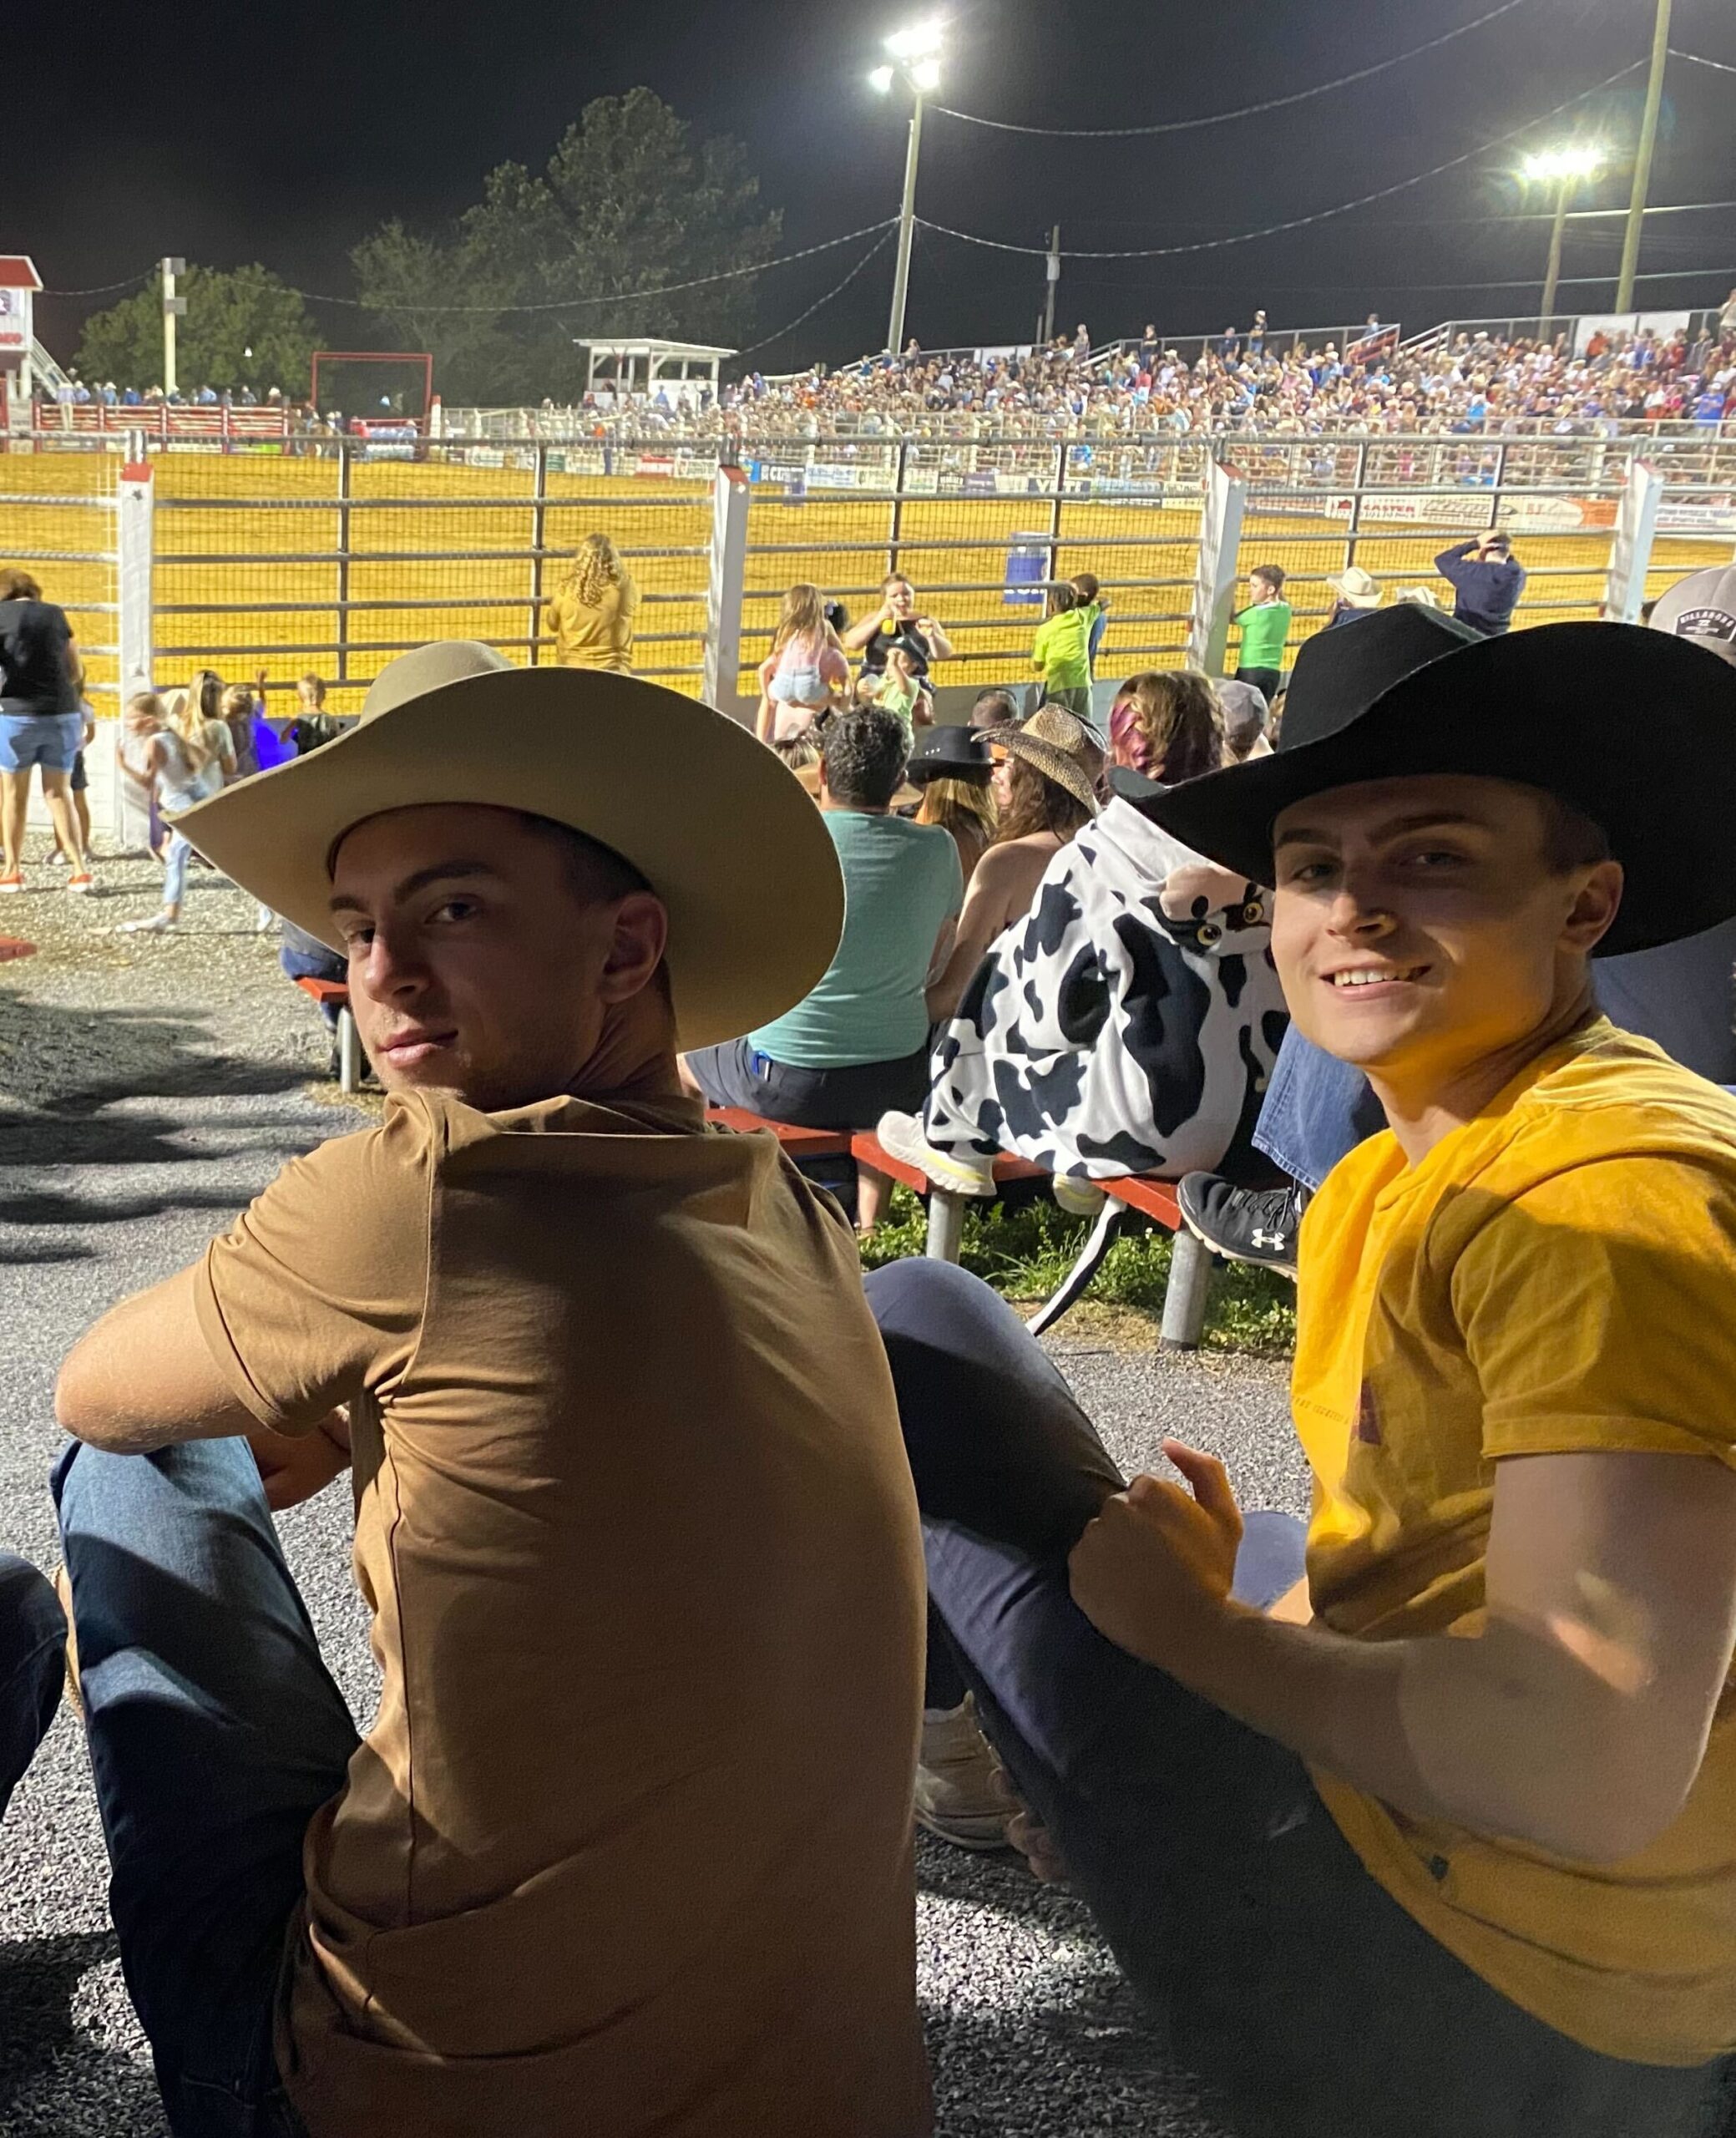 Jonathan and his friend sitting with cowboy hats at rodeo